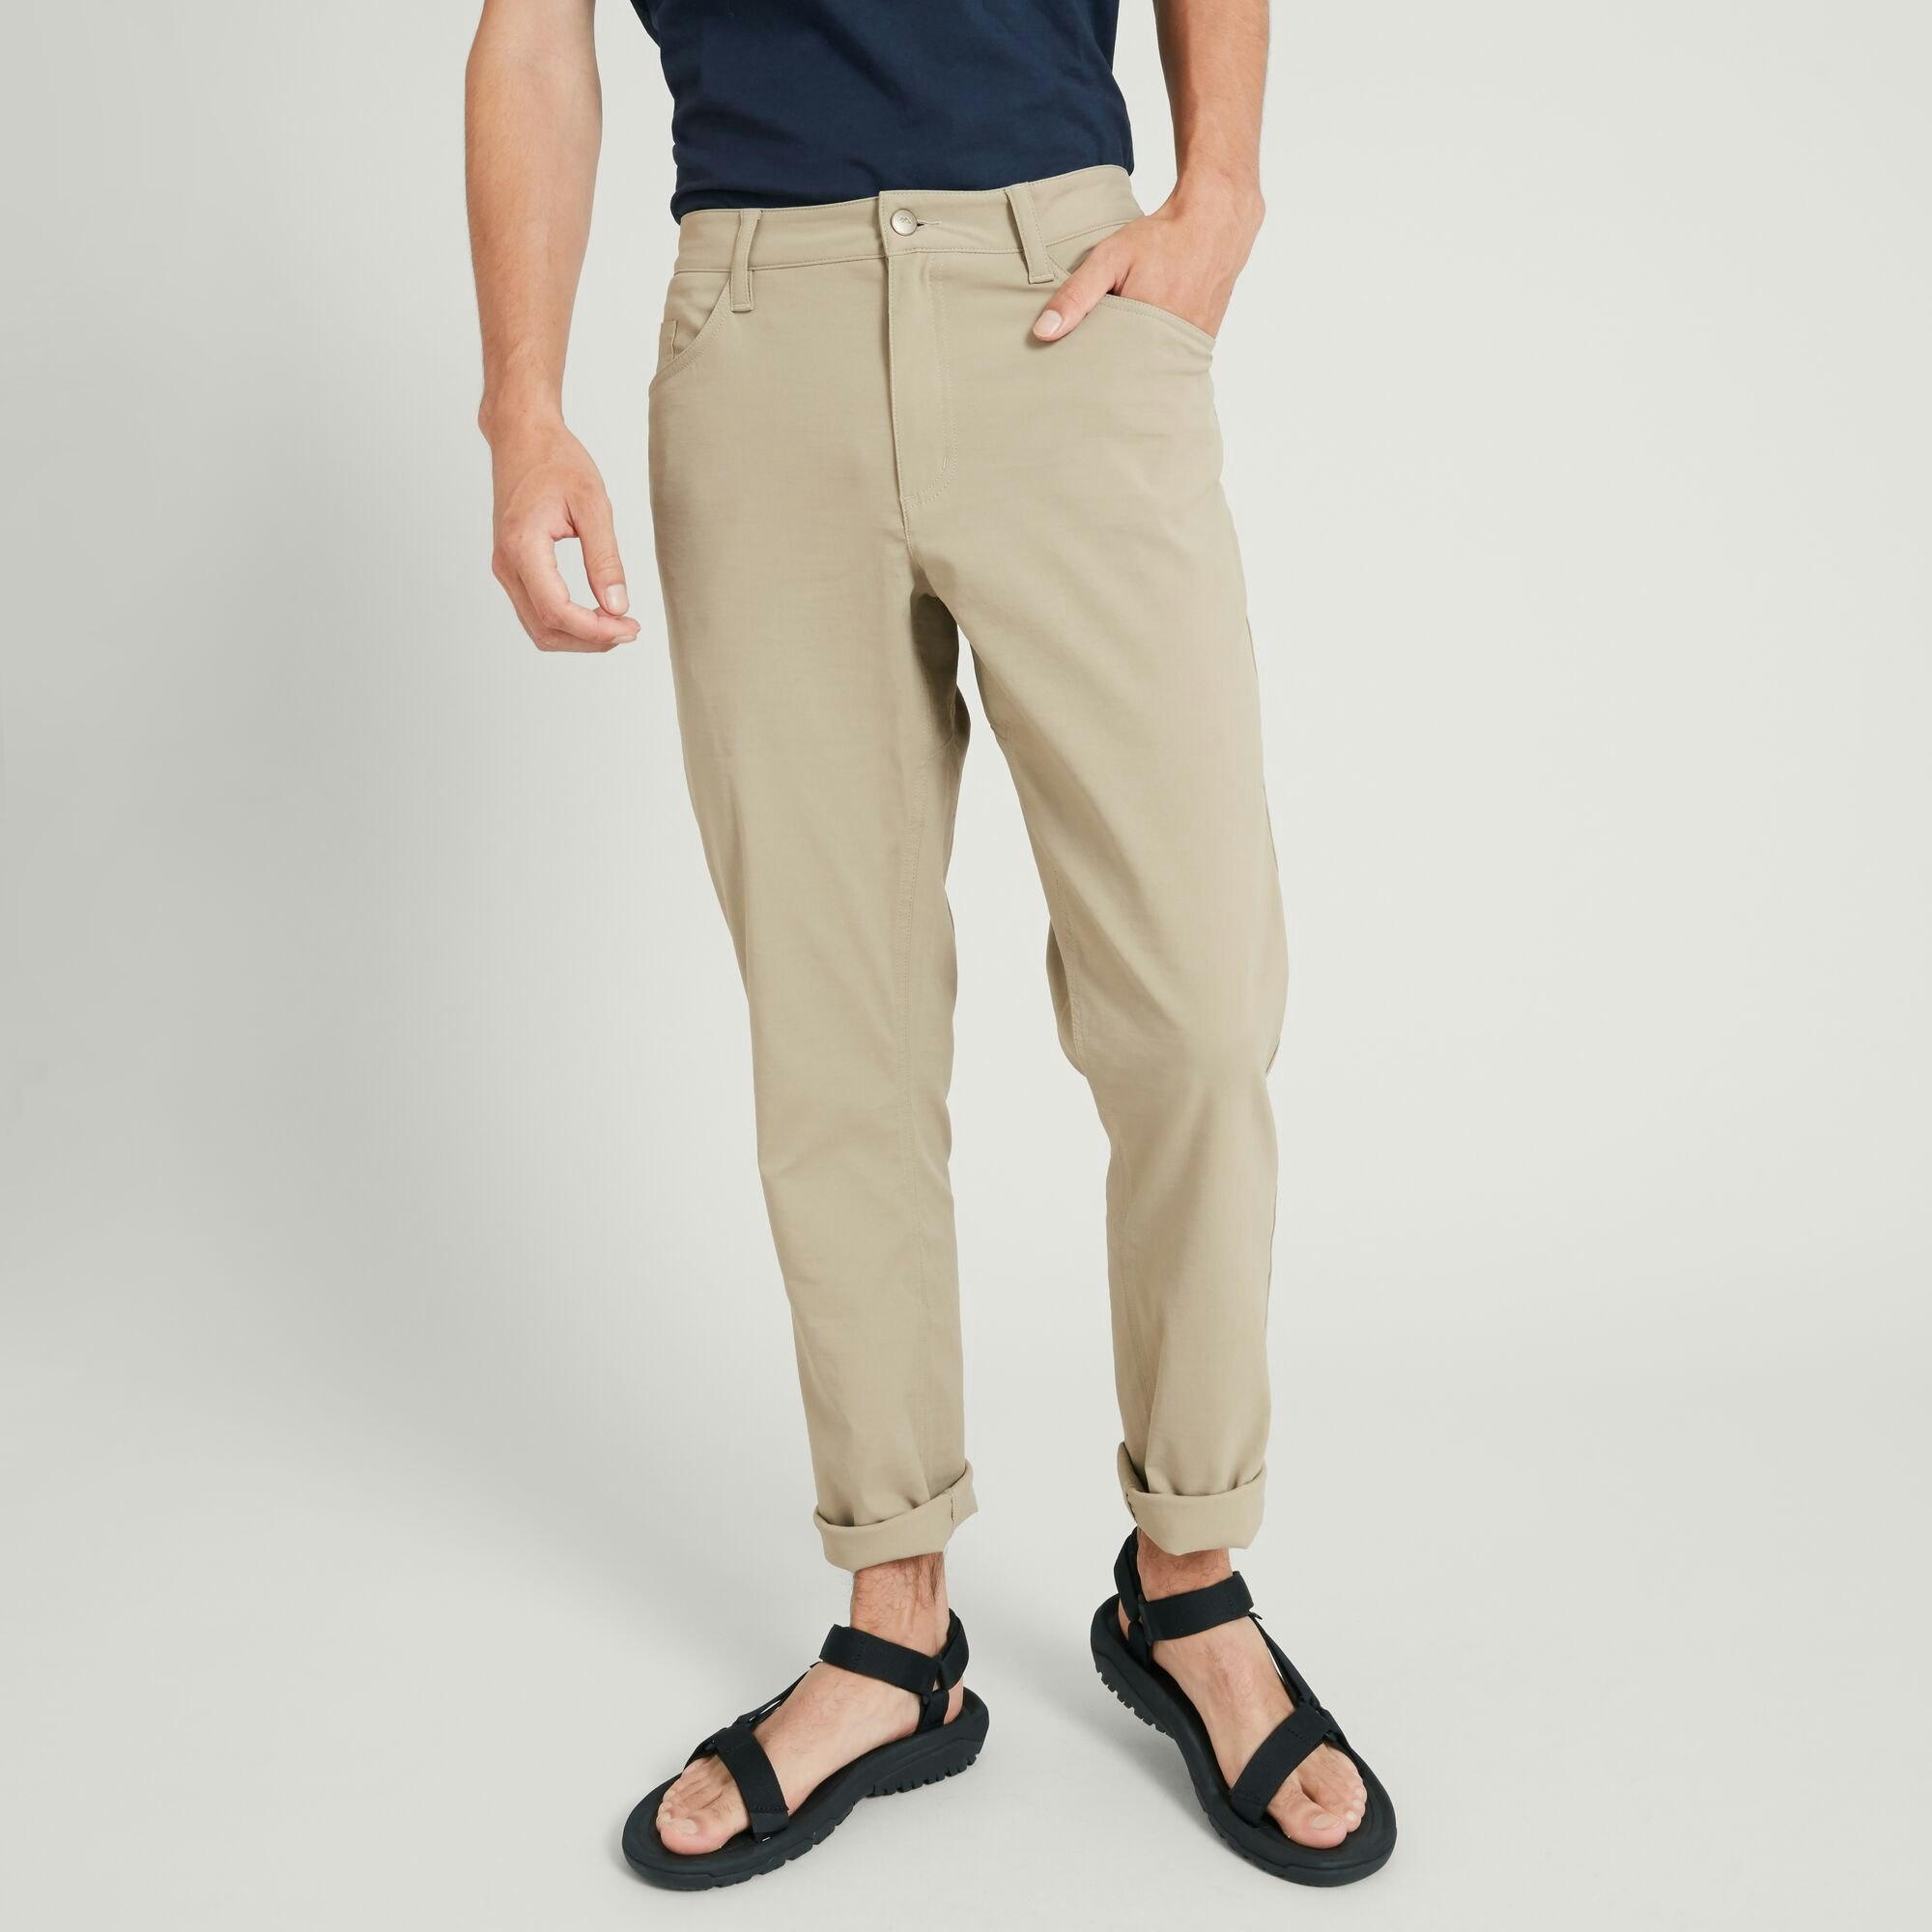 Discover 86+ khaki trousers mens uk best - in.cdgdbentre